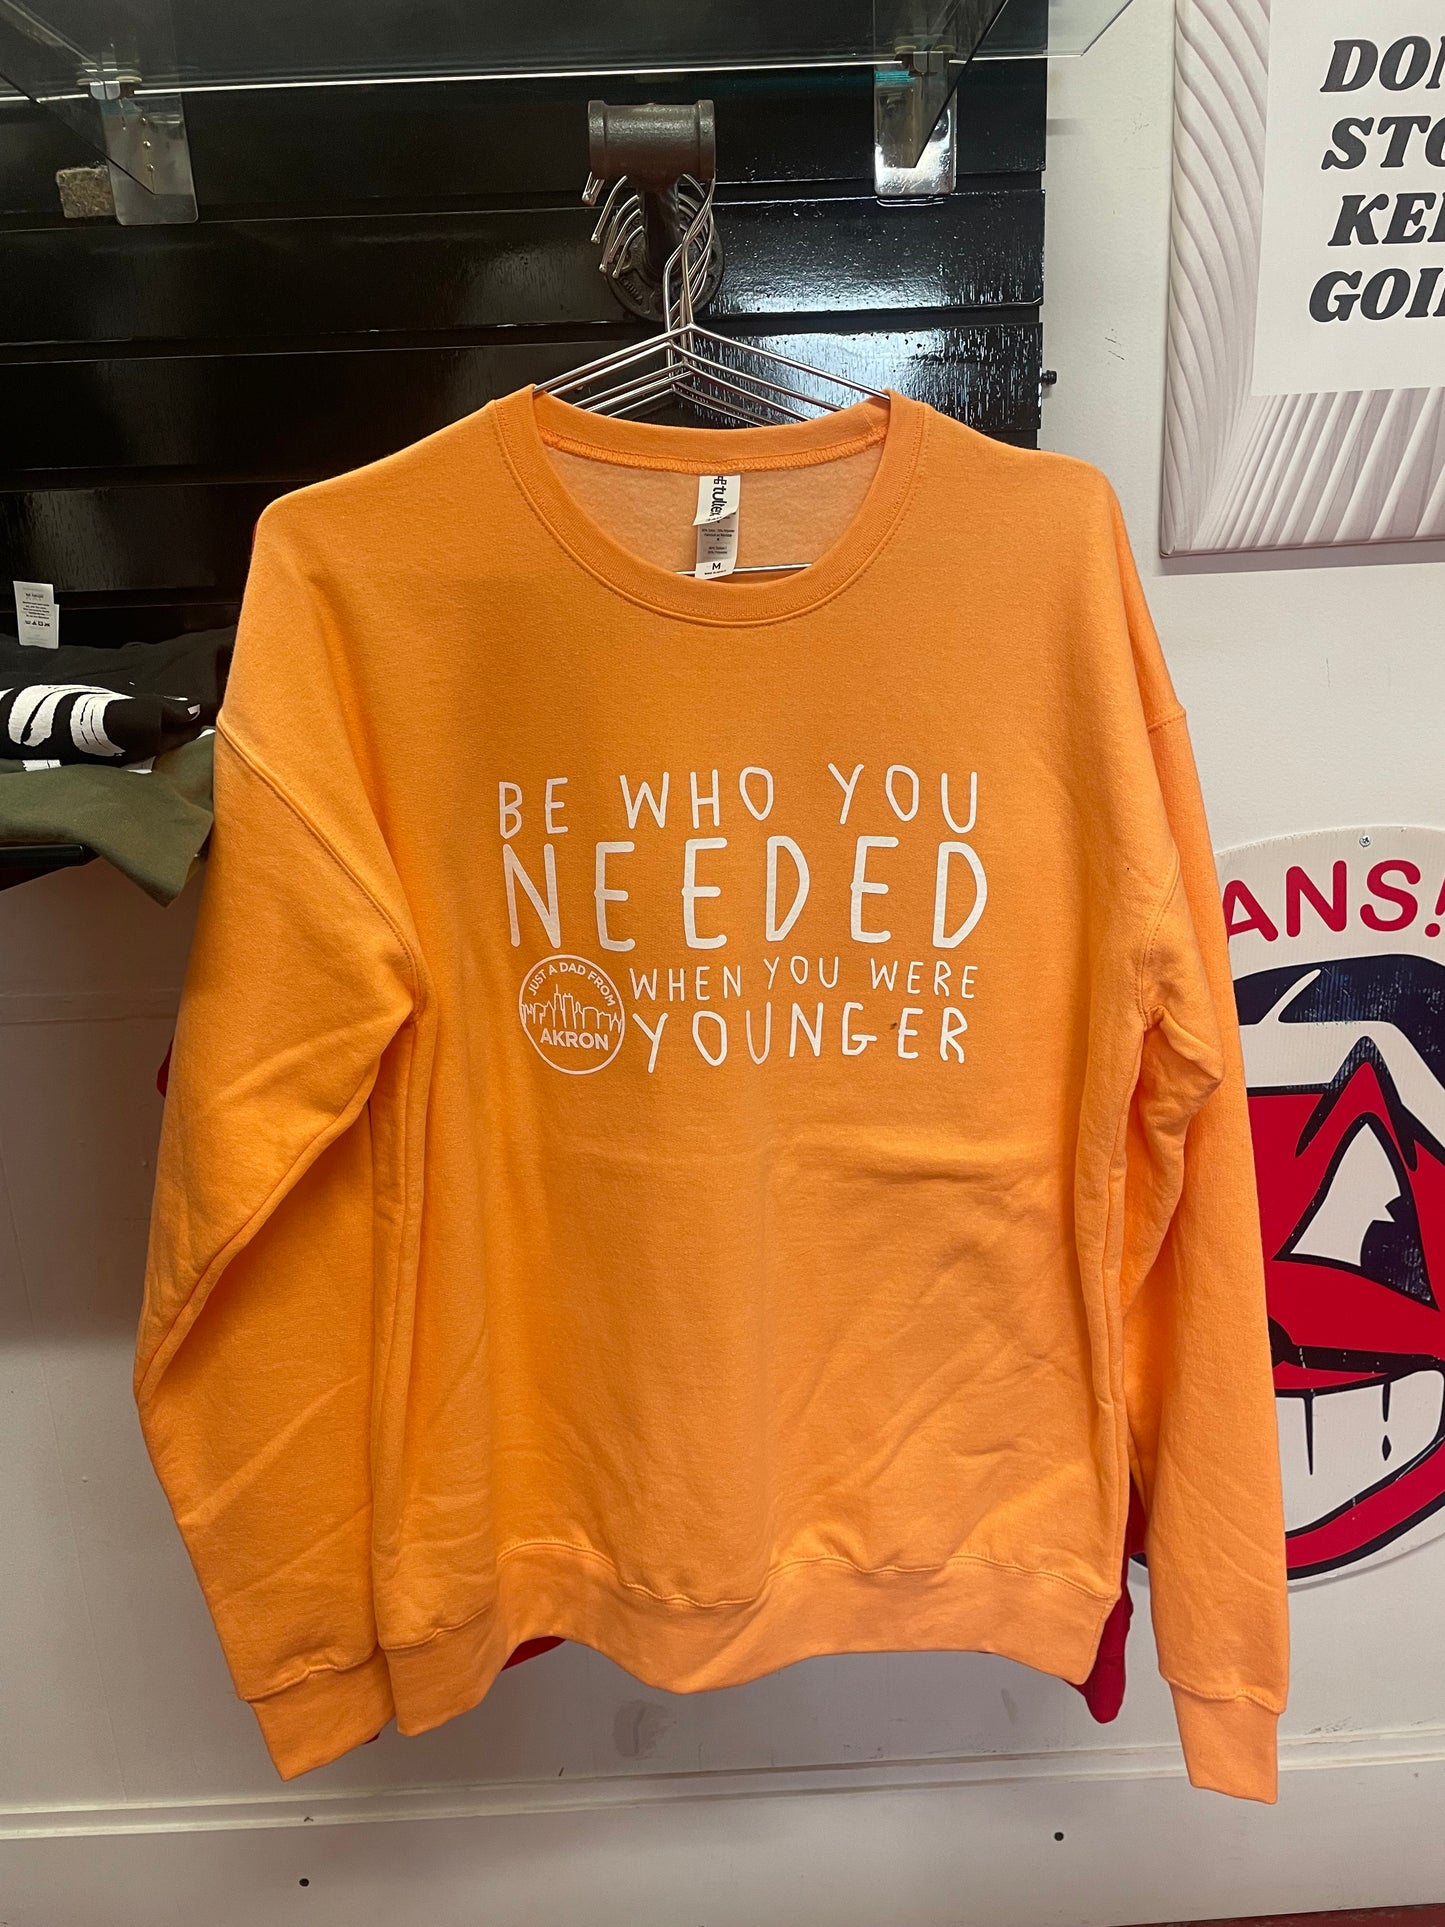 "Be who you needed when you were younger" Crew Neck Sweatshirt